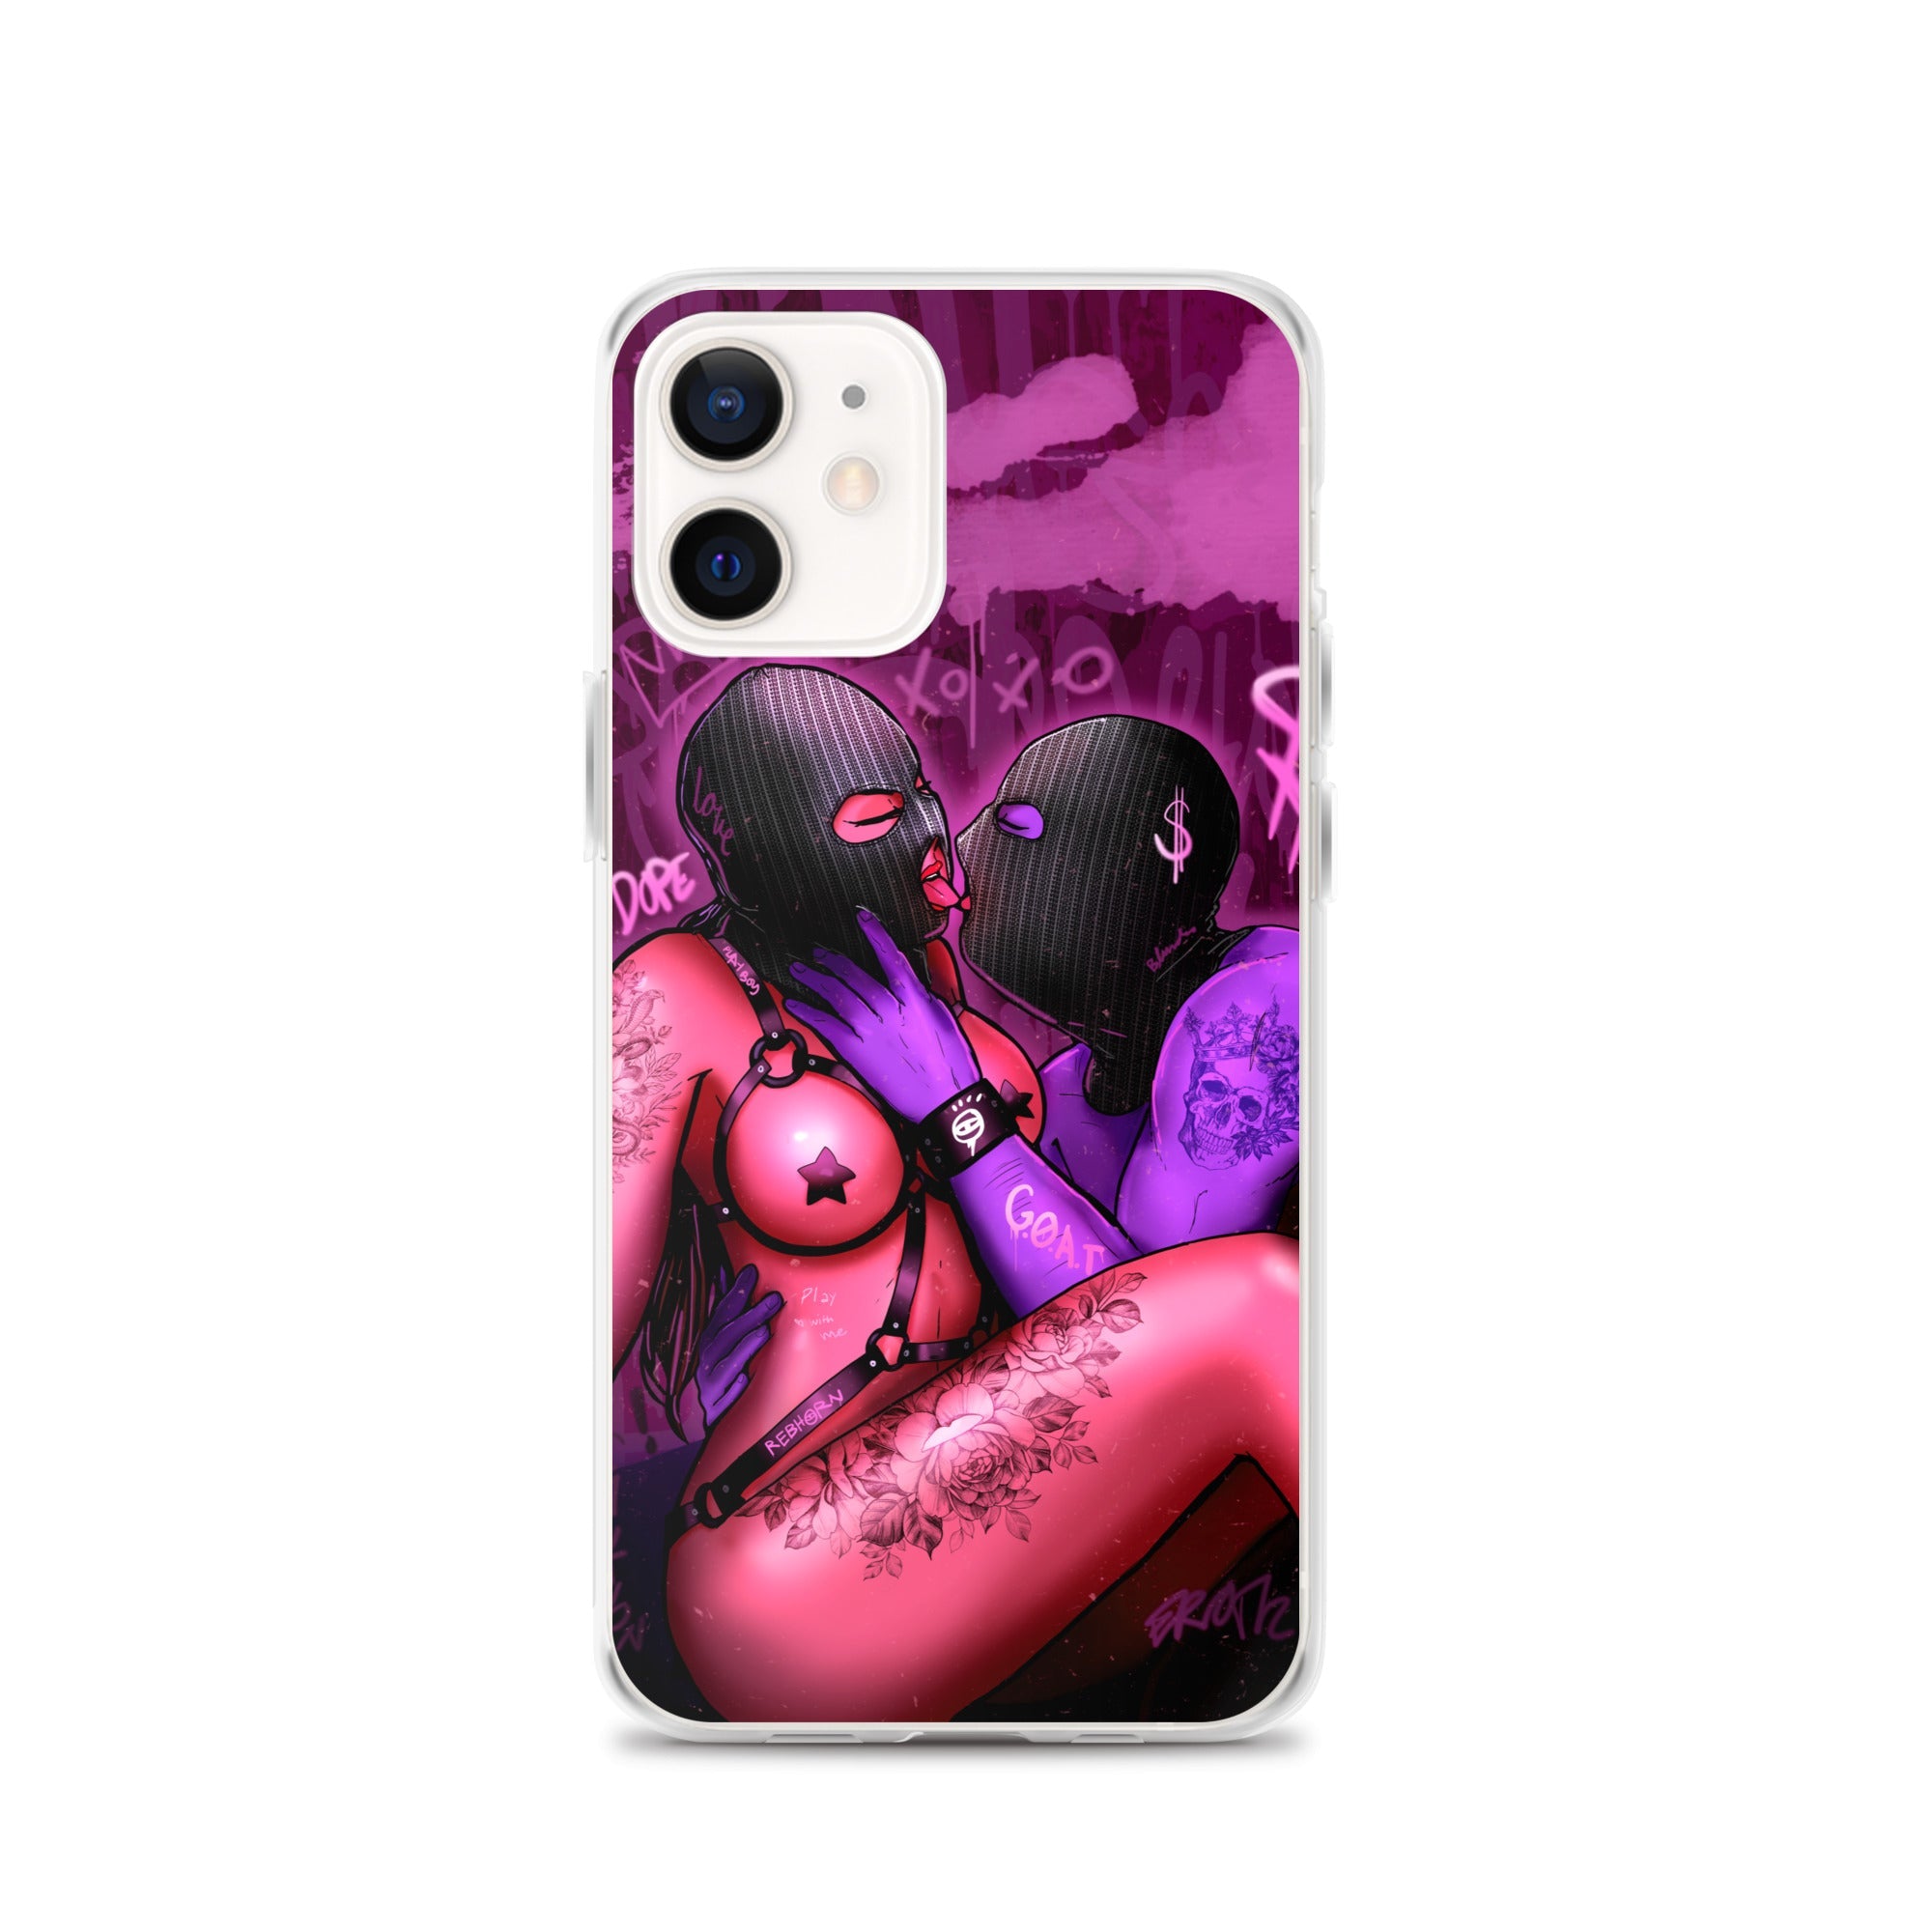 Erotica - Blinded By Love iPhone Case - REBHORN DESIGN